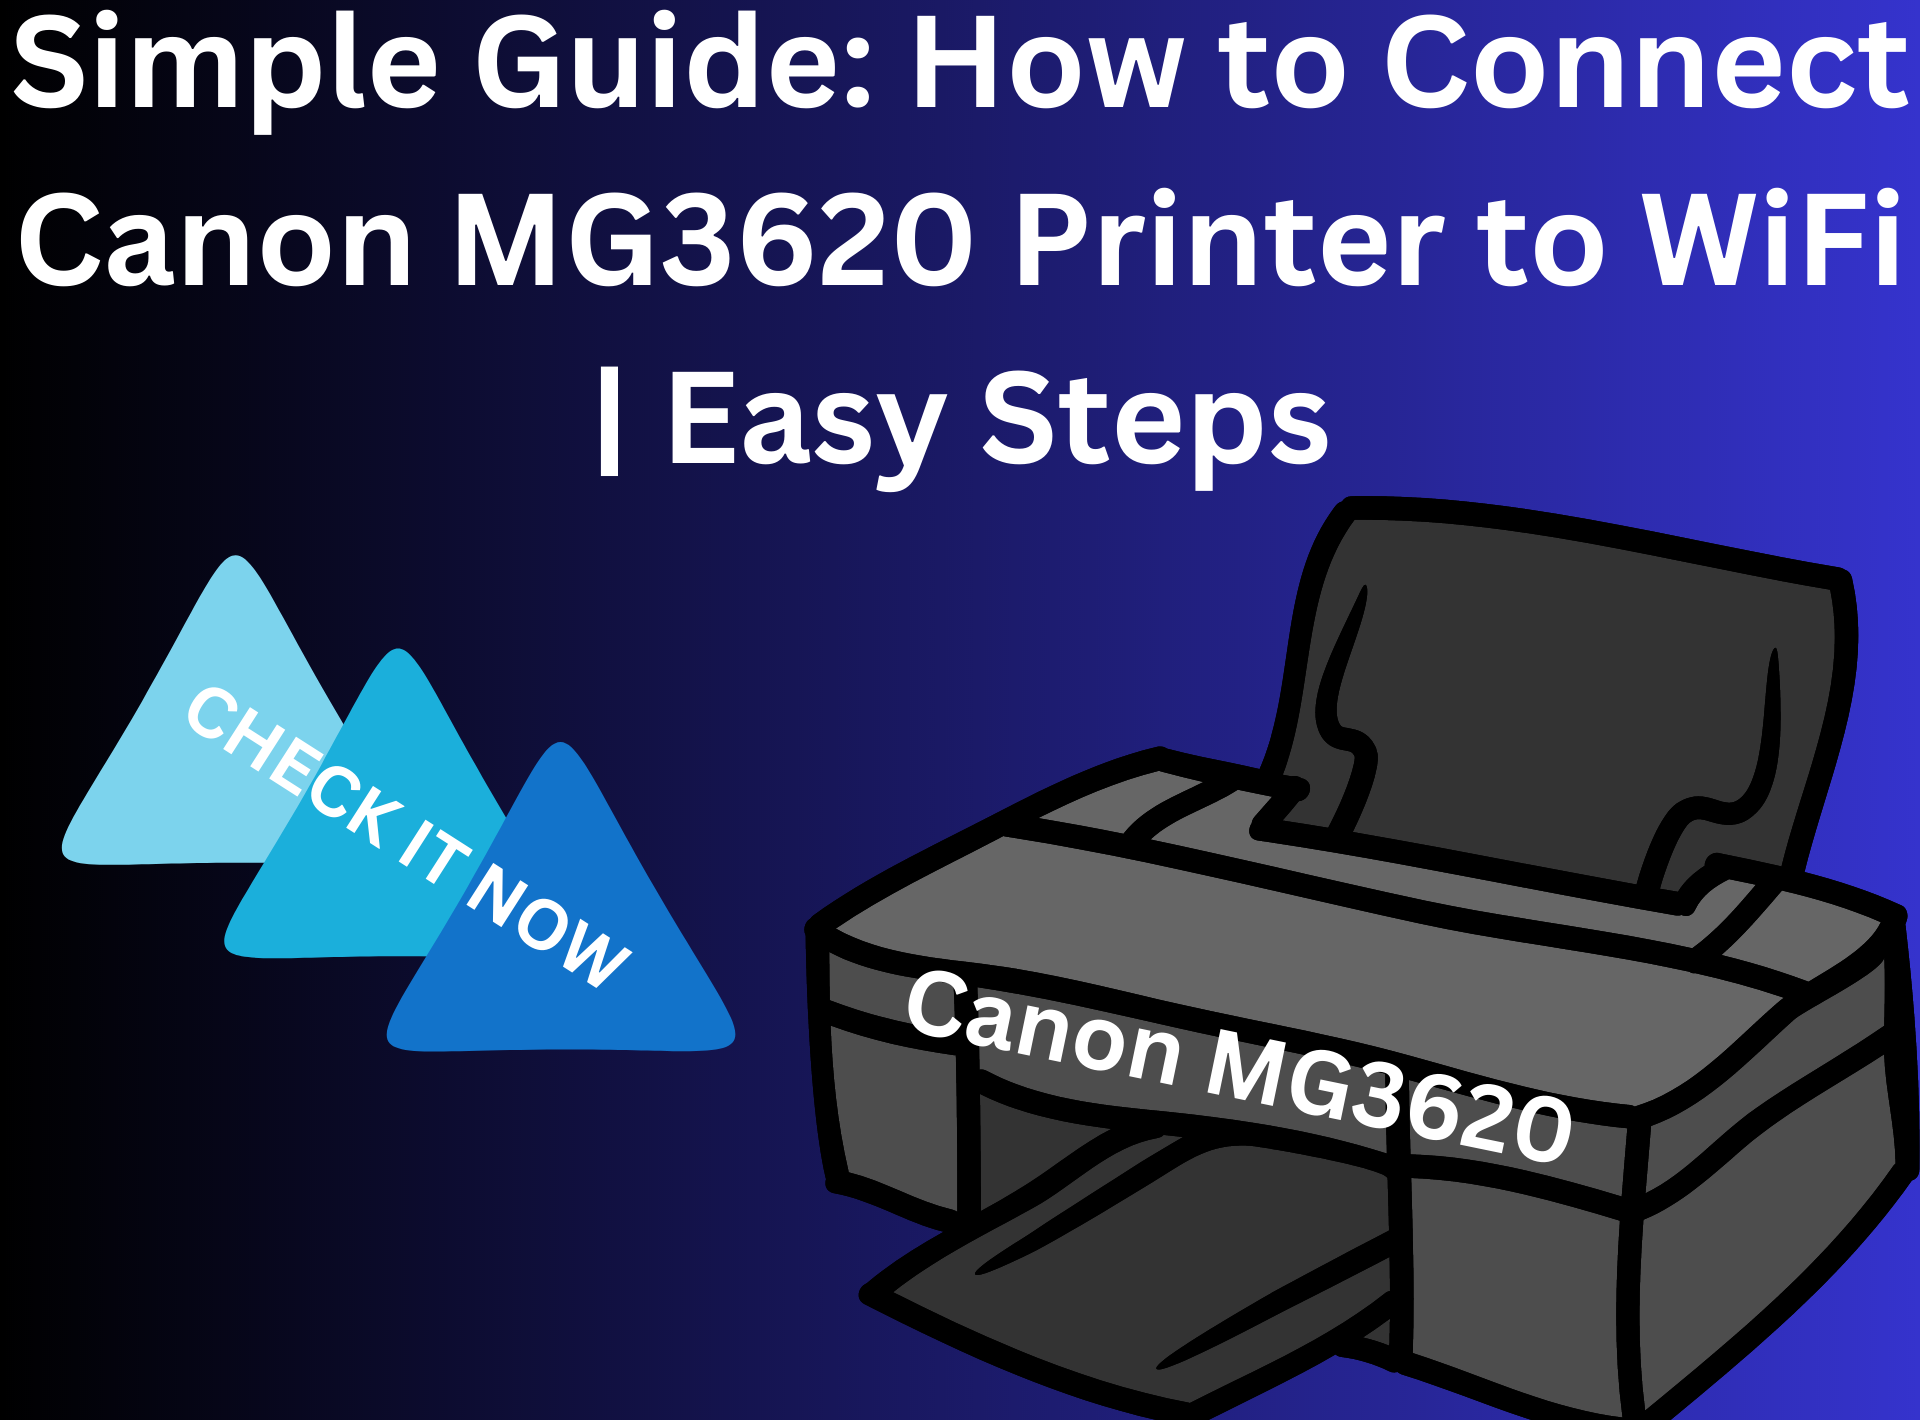 How to Connect Canon MG3620 Printer to Wifi